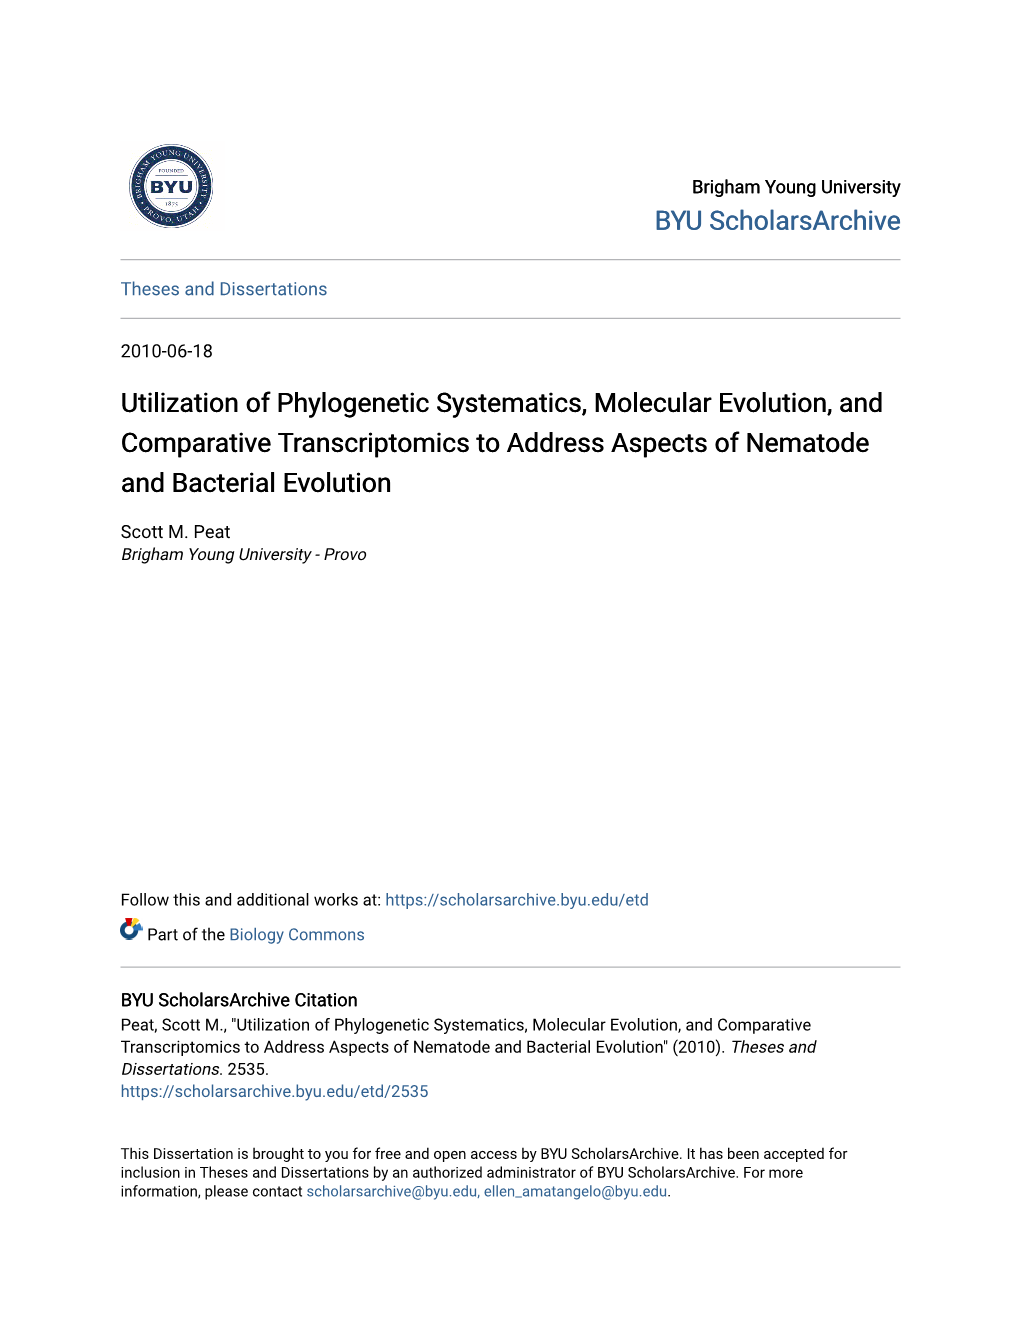 Utilization of Phylogenetic Systematics, Molecular Evolution, and Comparative Transcriptomics to Address Aspects of Nematode and Bacterial Evolution